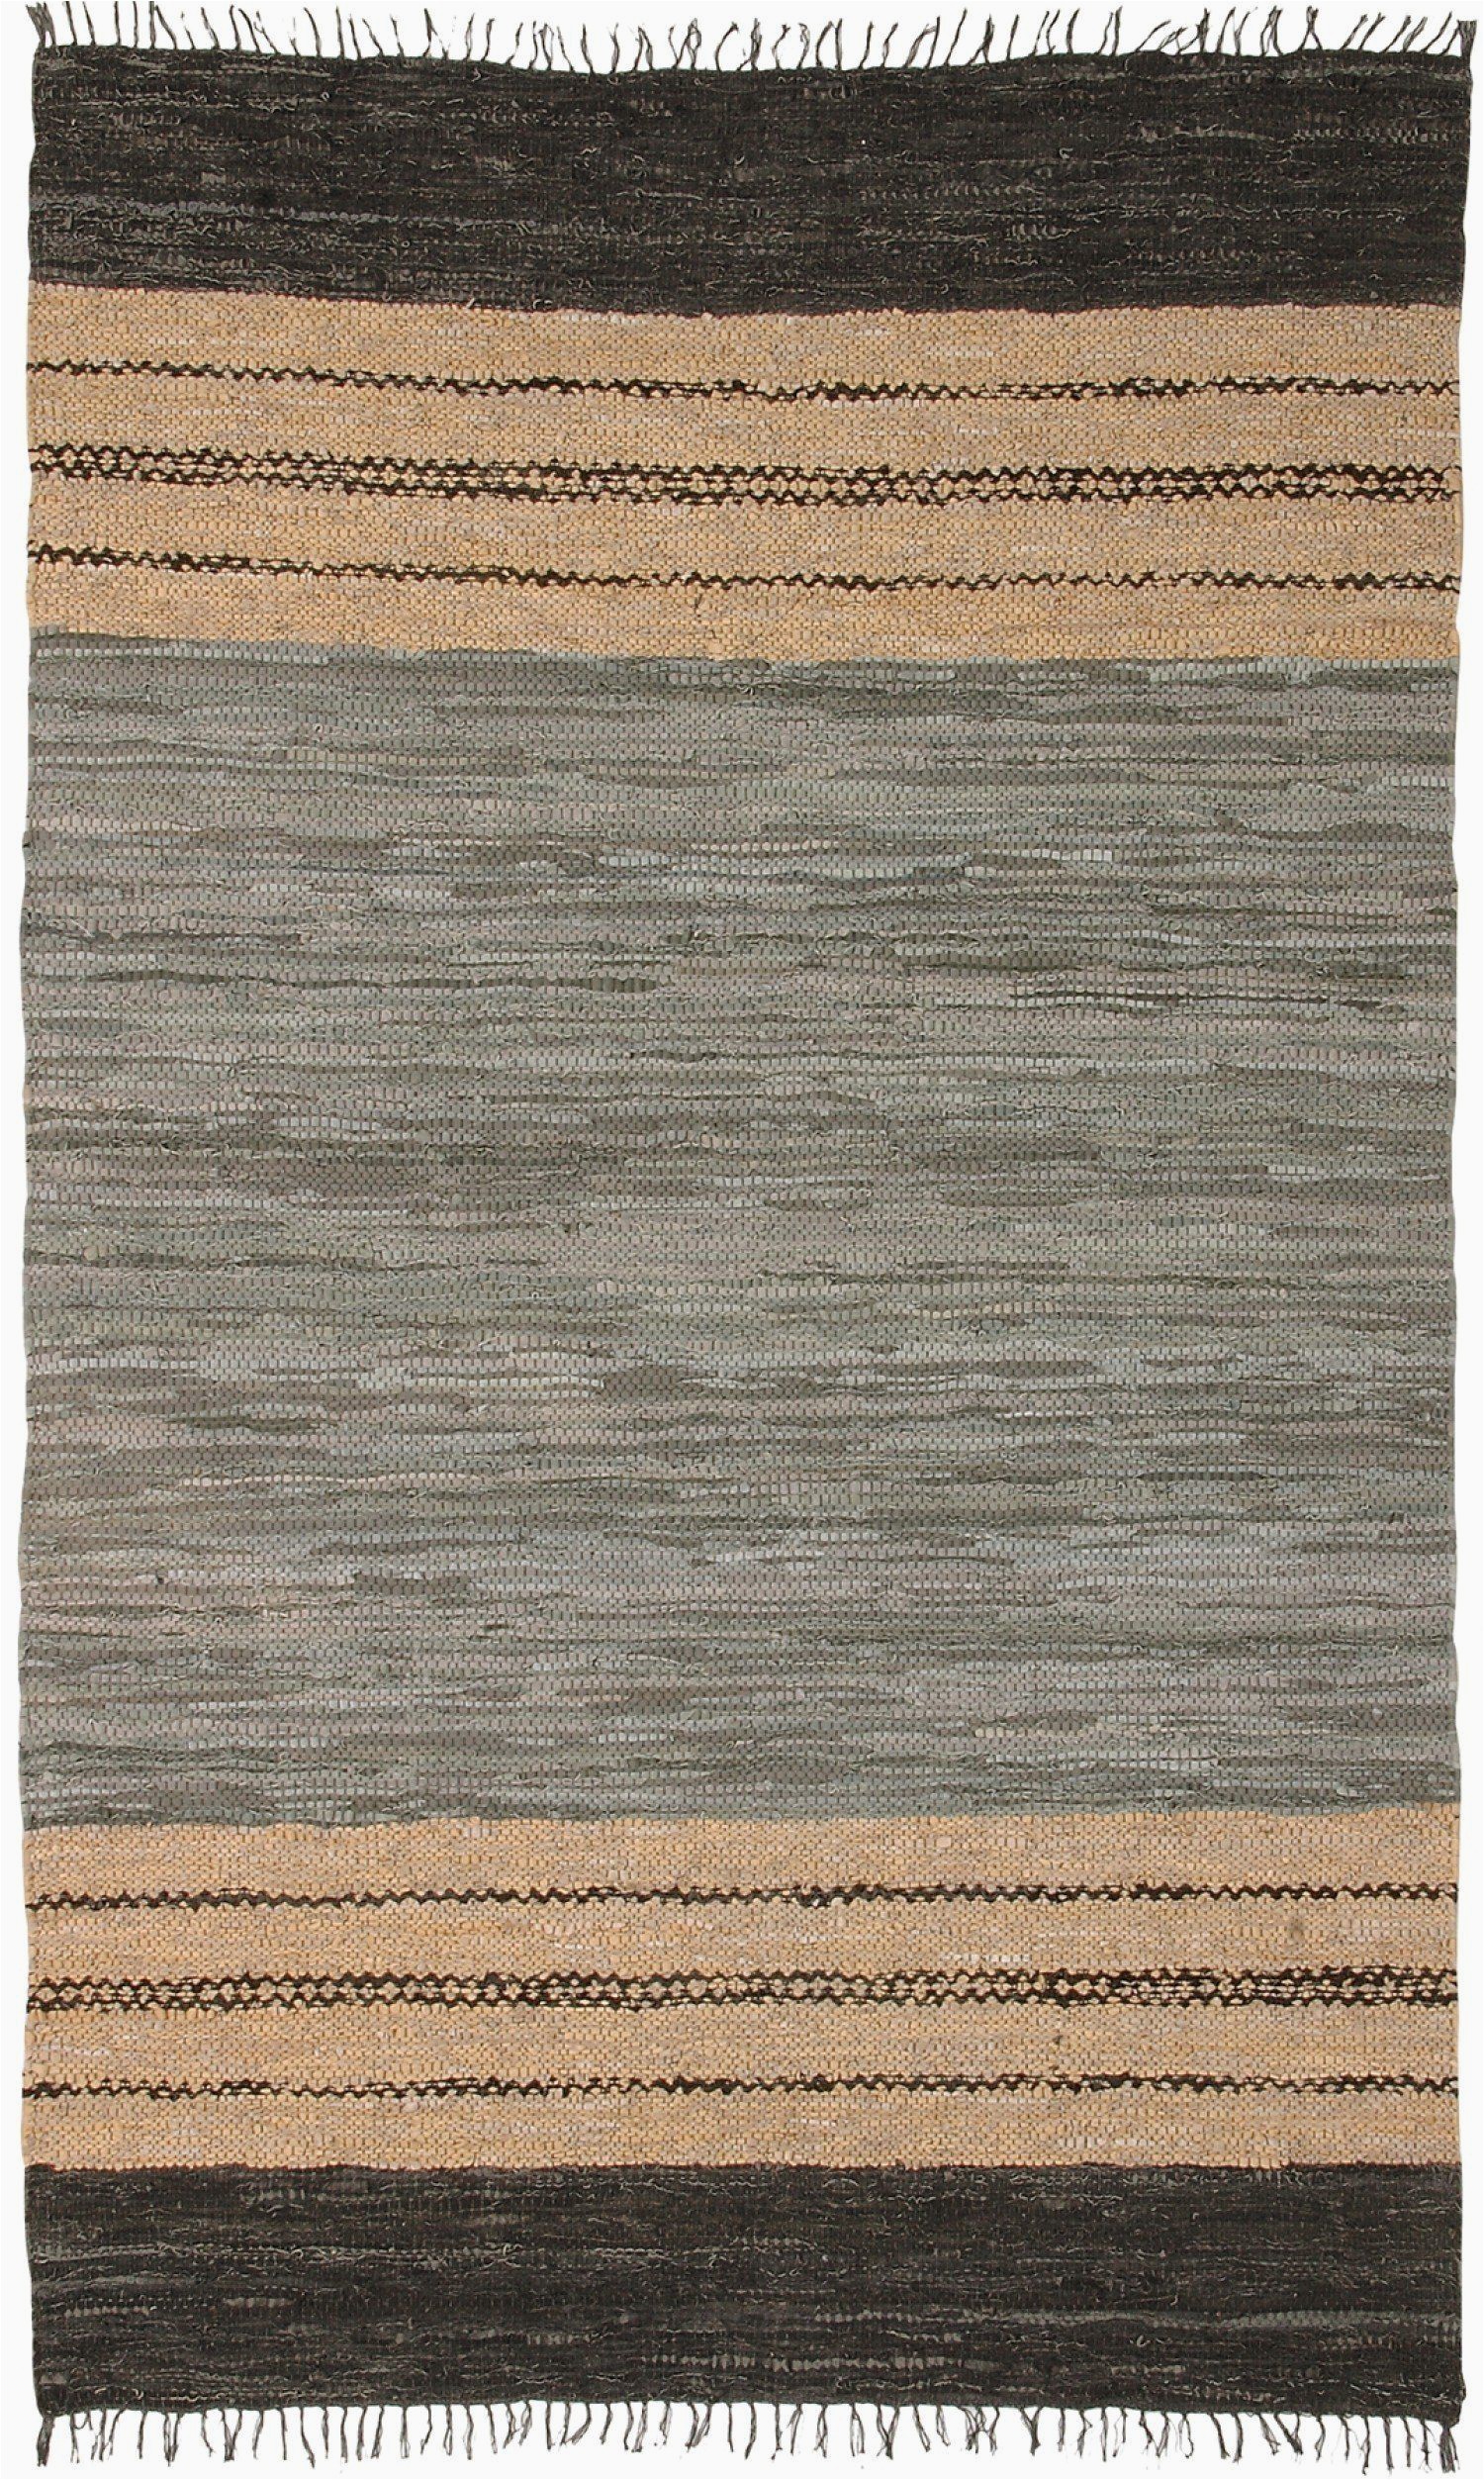 Black Gray and Tan area Rugs Leather Ehden Le066 Gray Gray Black Tan Rug